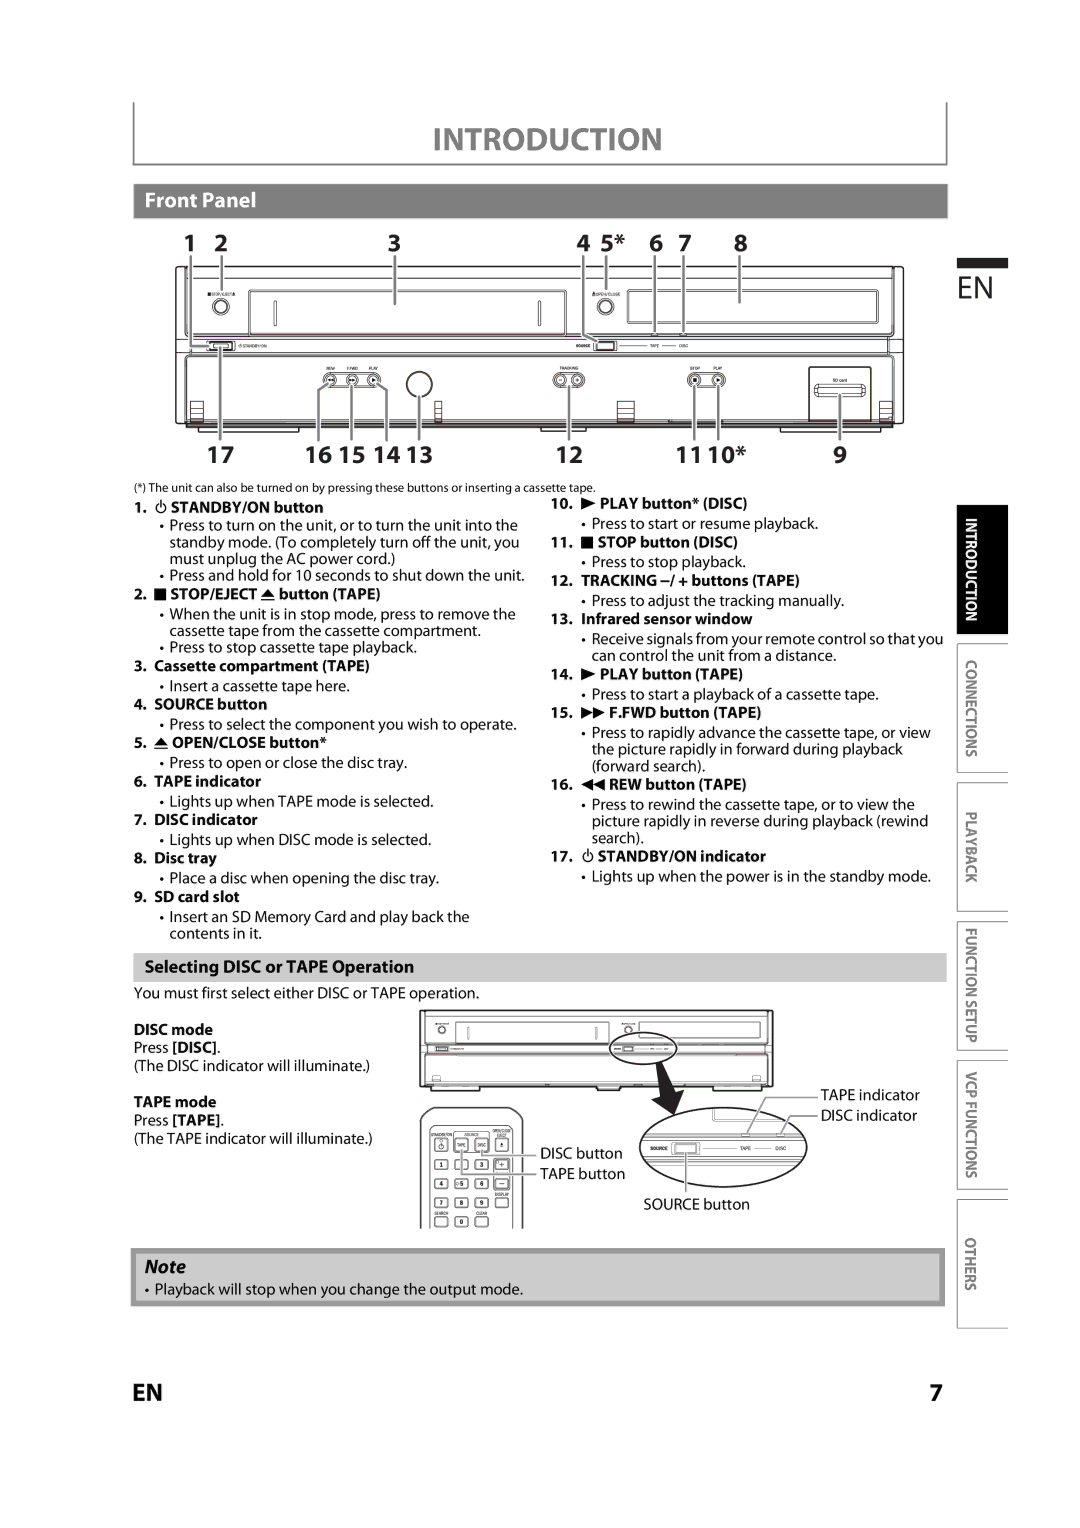 Magnavox MBP110V/F7 owner manual Front Panel, Selecting Disc or Tape Operation 